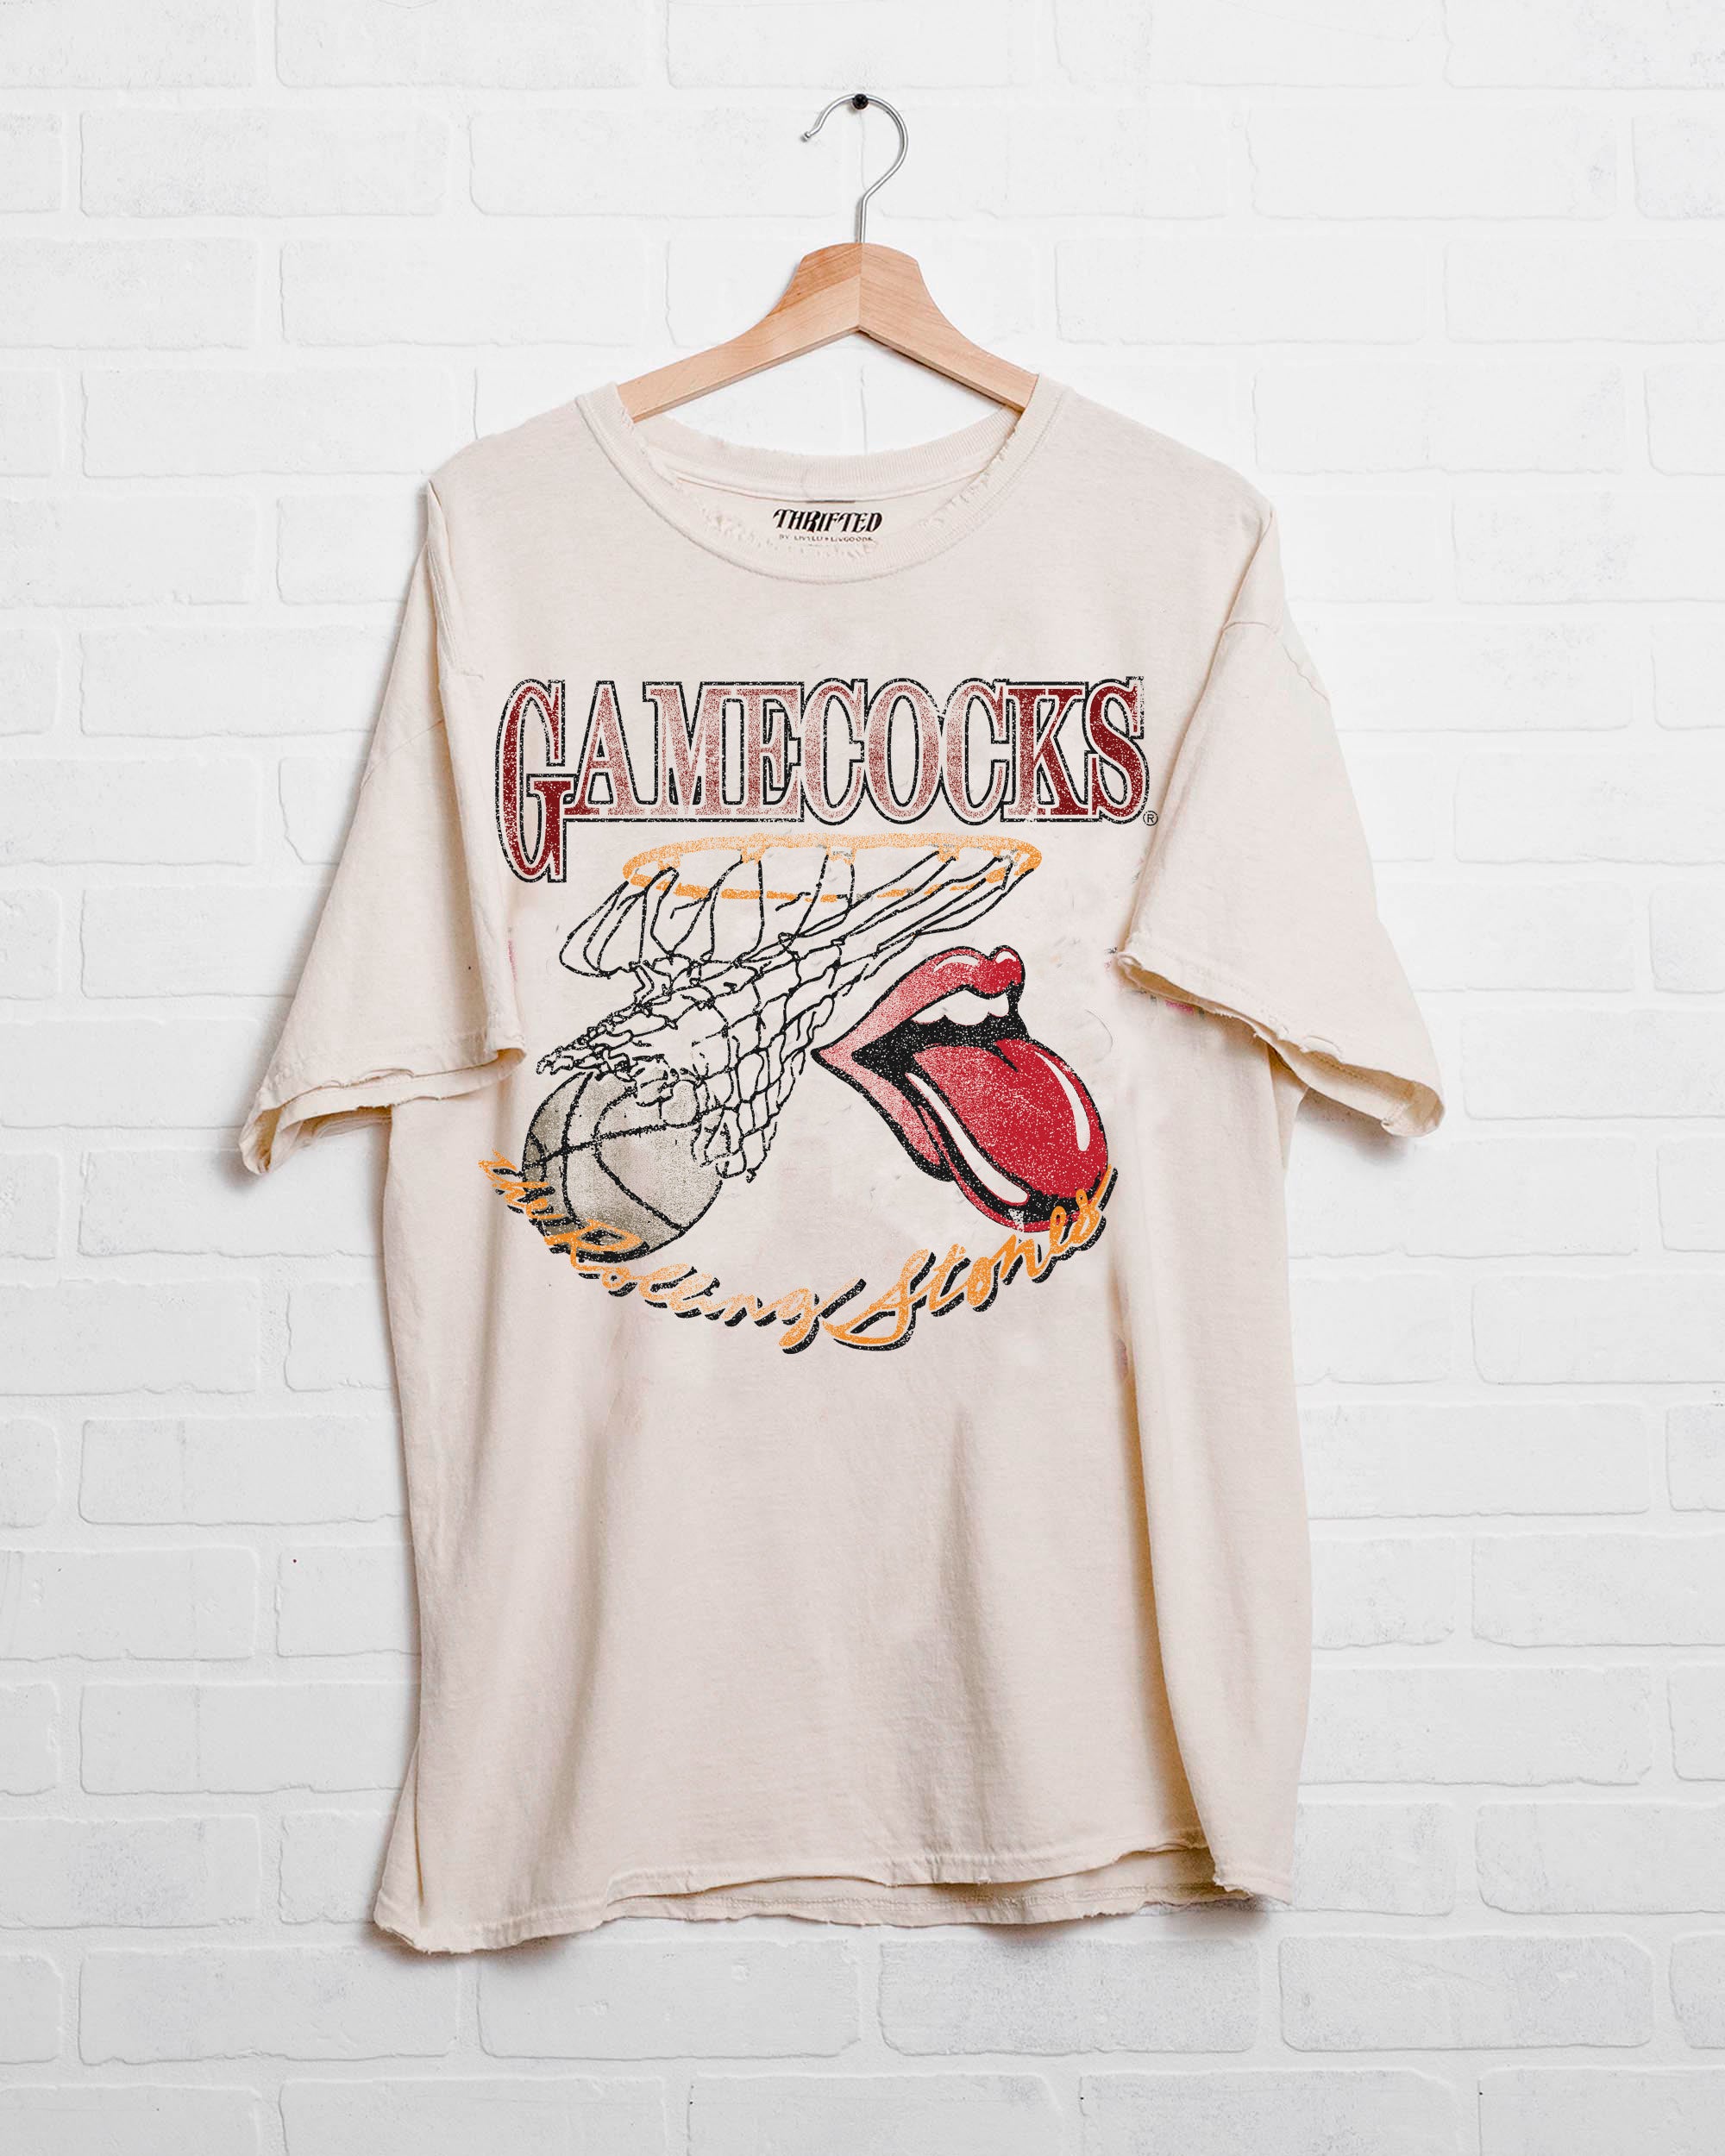 Rolling Stones Gamecocks Basketball Net Off White Thrifted Tee - shoplivylu